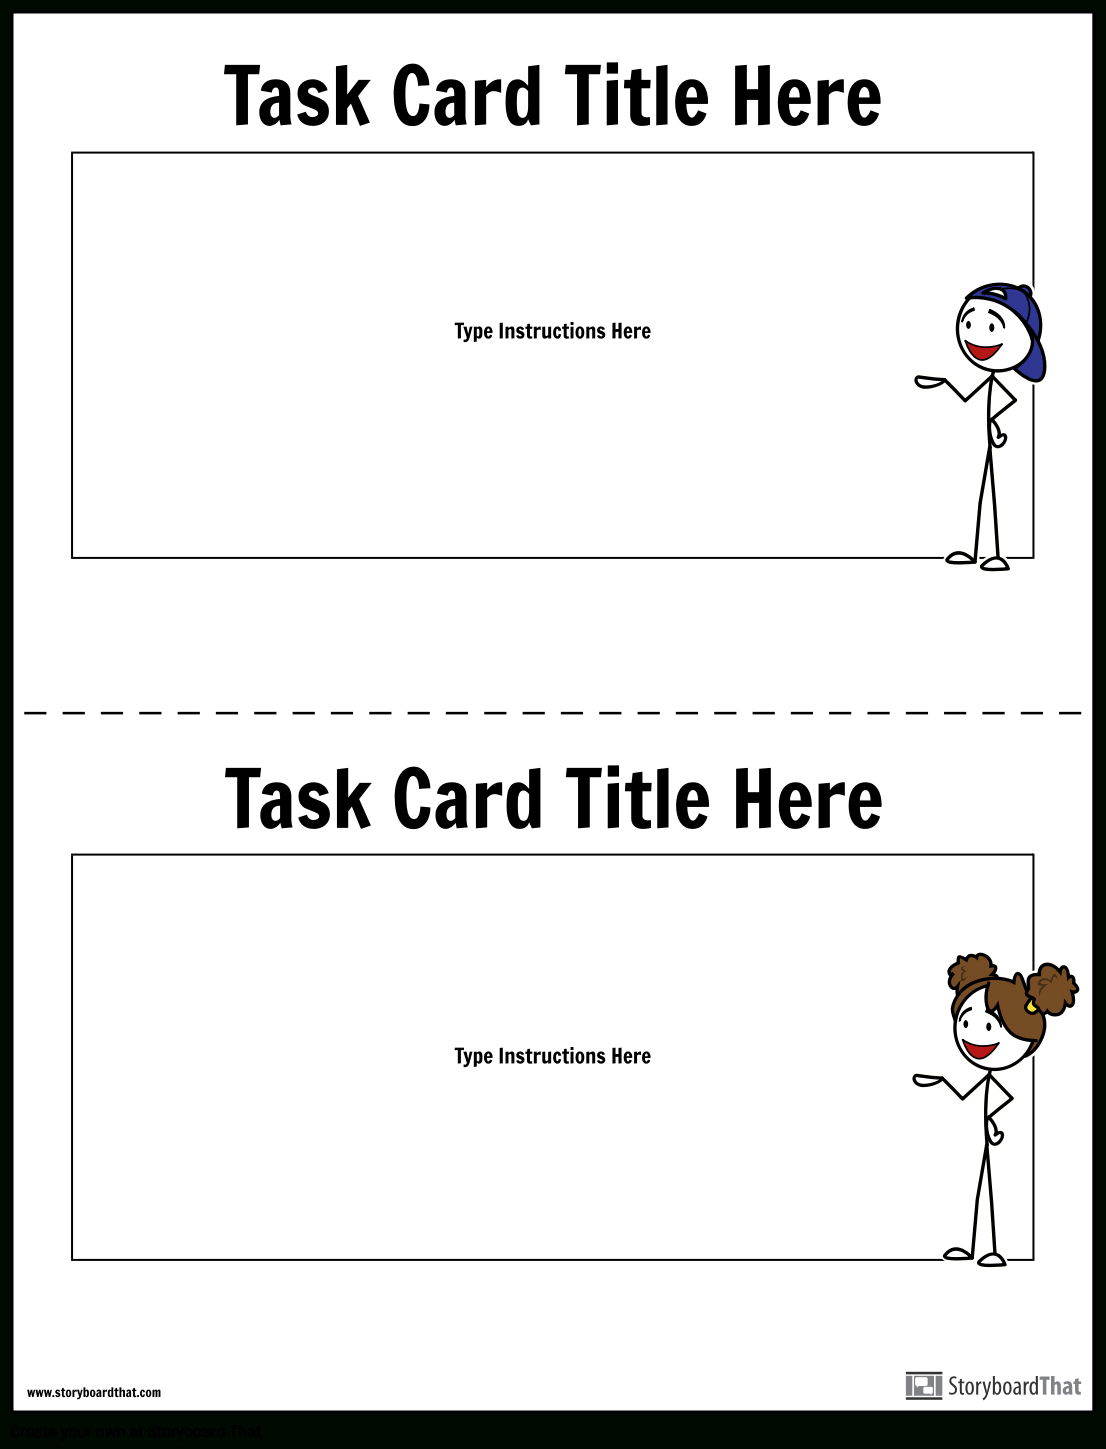 Task Card Template | Task Card Maker Pertaining To Task Card Template